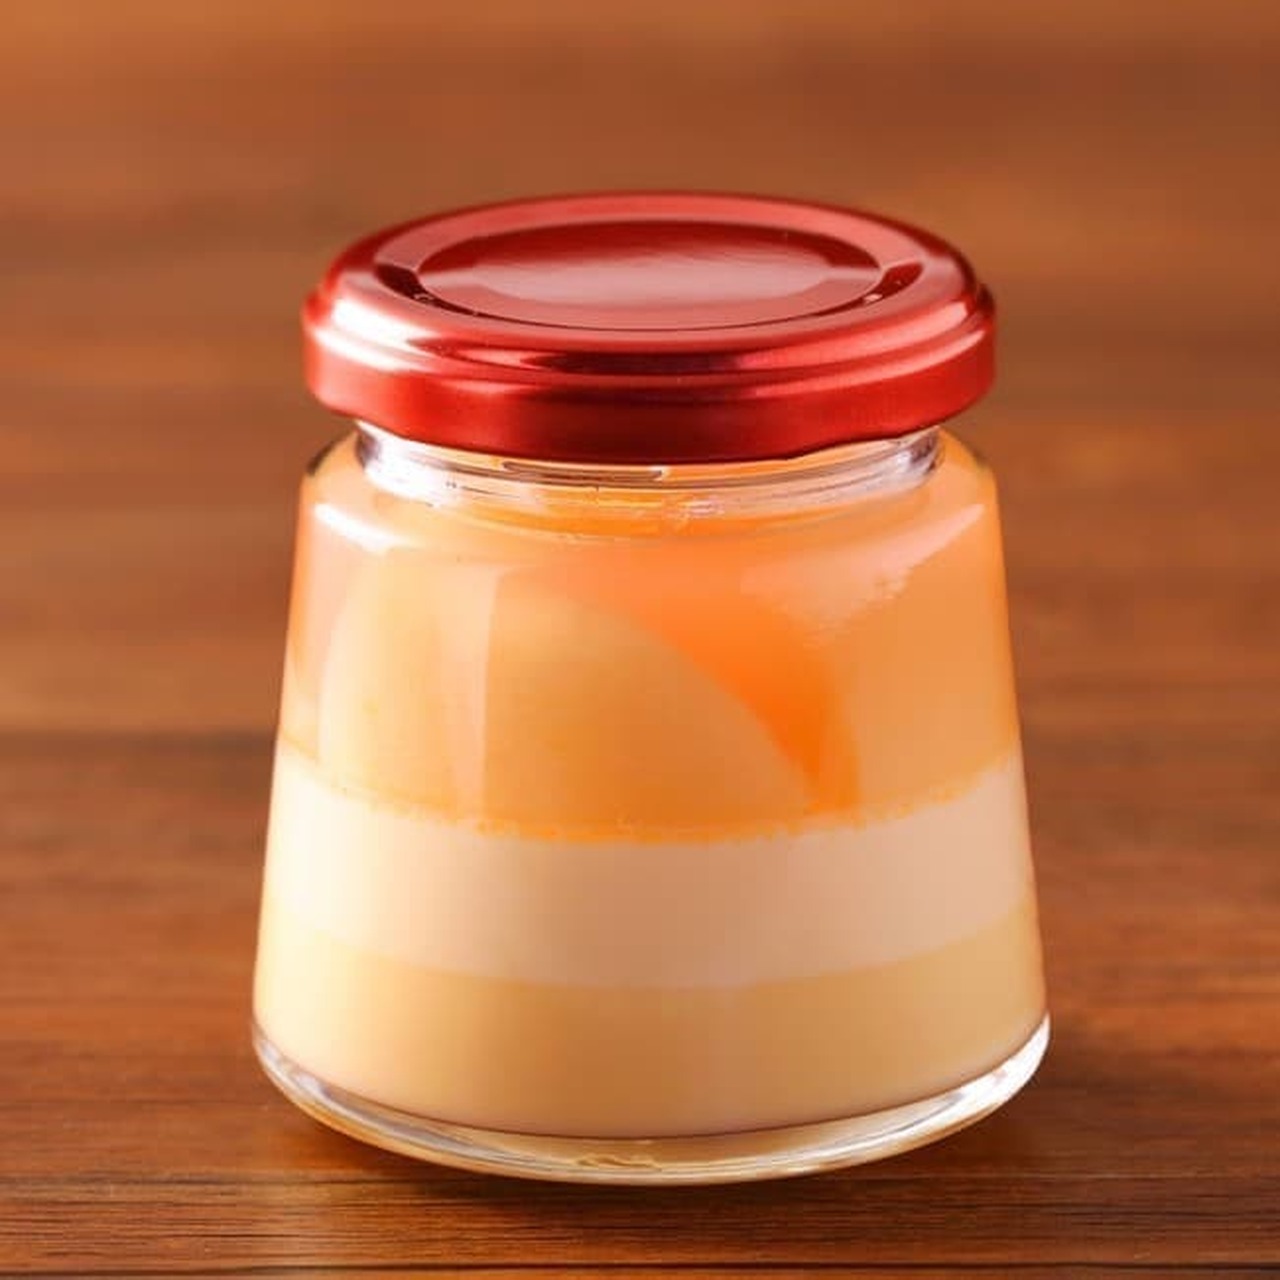 In love with pudding, "fruit peach pudding"